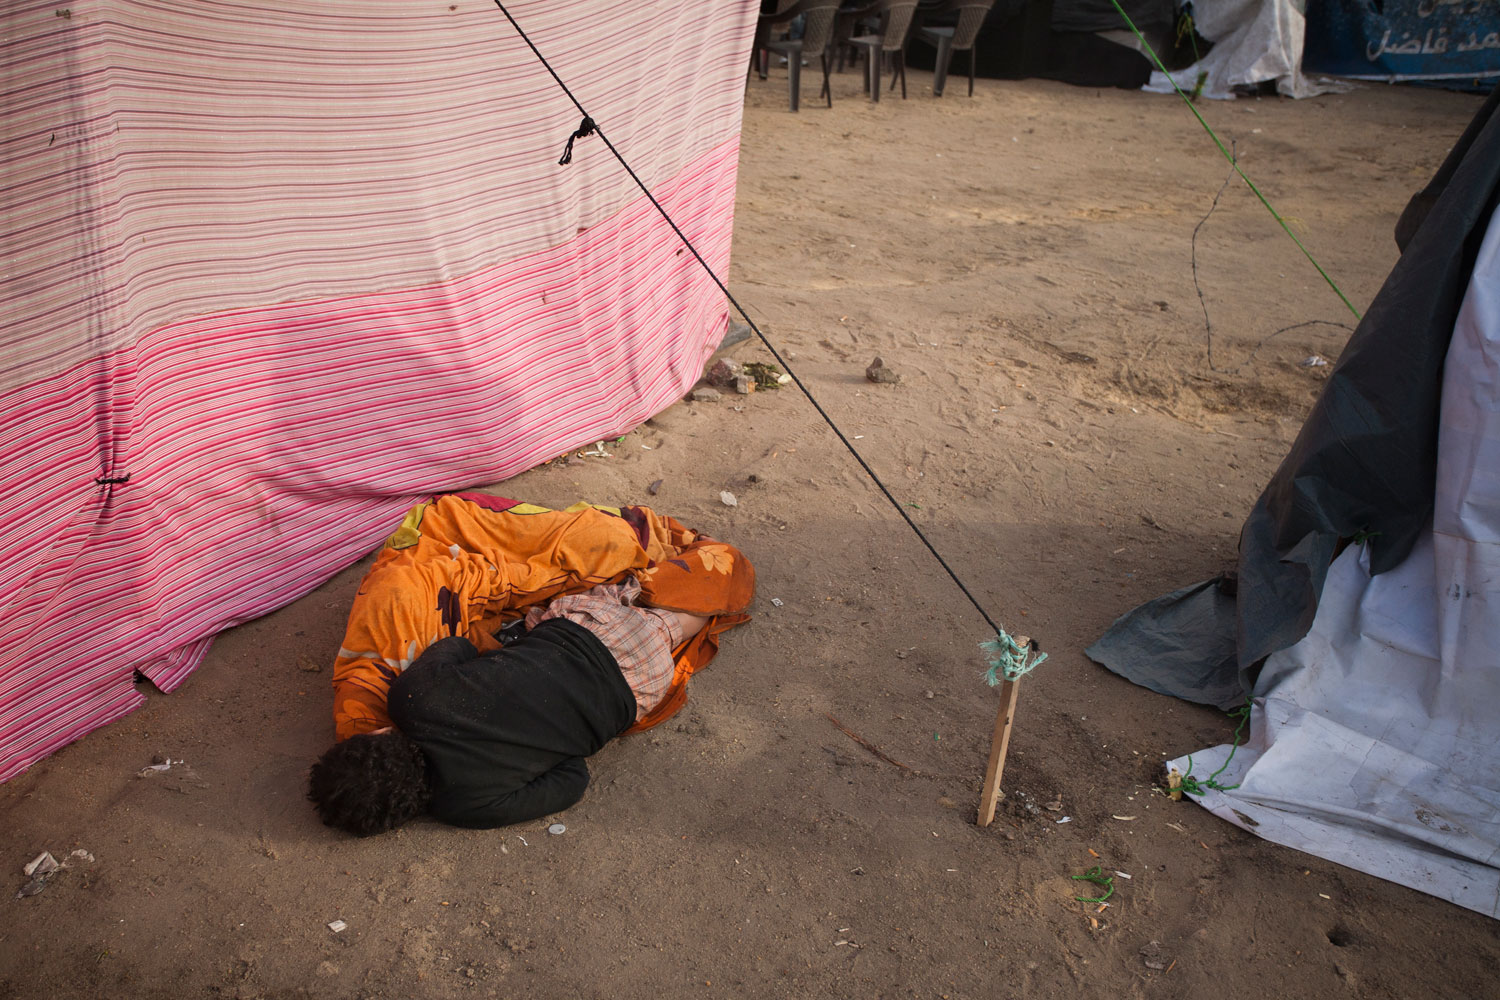 Two boys sleep during the day in the tent city in Tahrir.